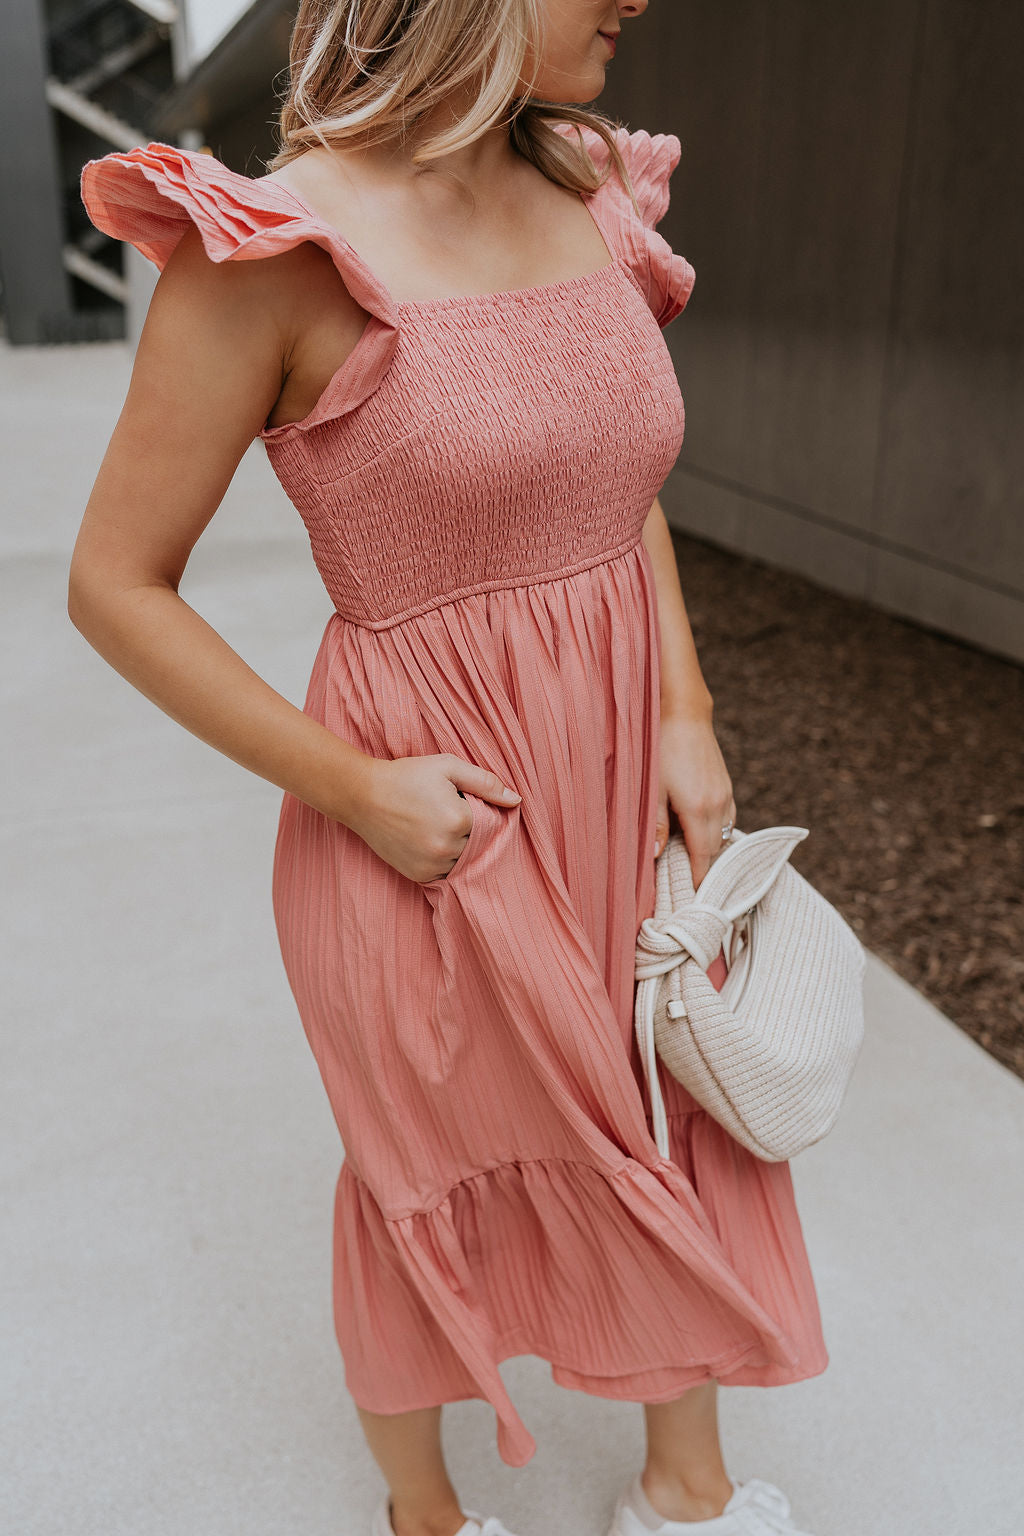 Side view of female model wearing the Allie Coral Pink Ruffle Midi Dress which features Coral Pink Lightweight Fabric, Midi Length, Coral Pink Lining, Ruffle Tier Skirt, Smocked Upper, Square Neckline, Ruffle Straps and Two Side Pockets